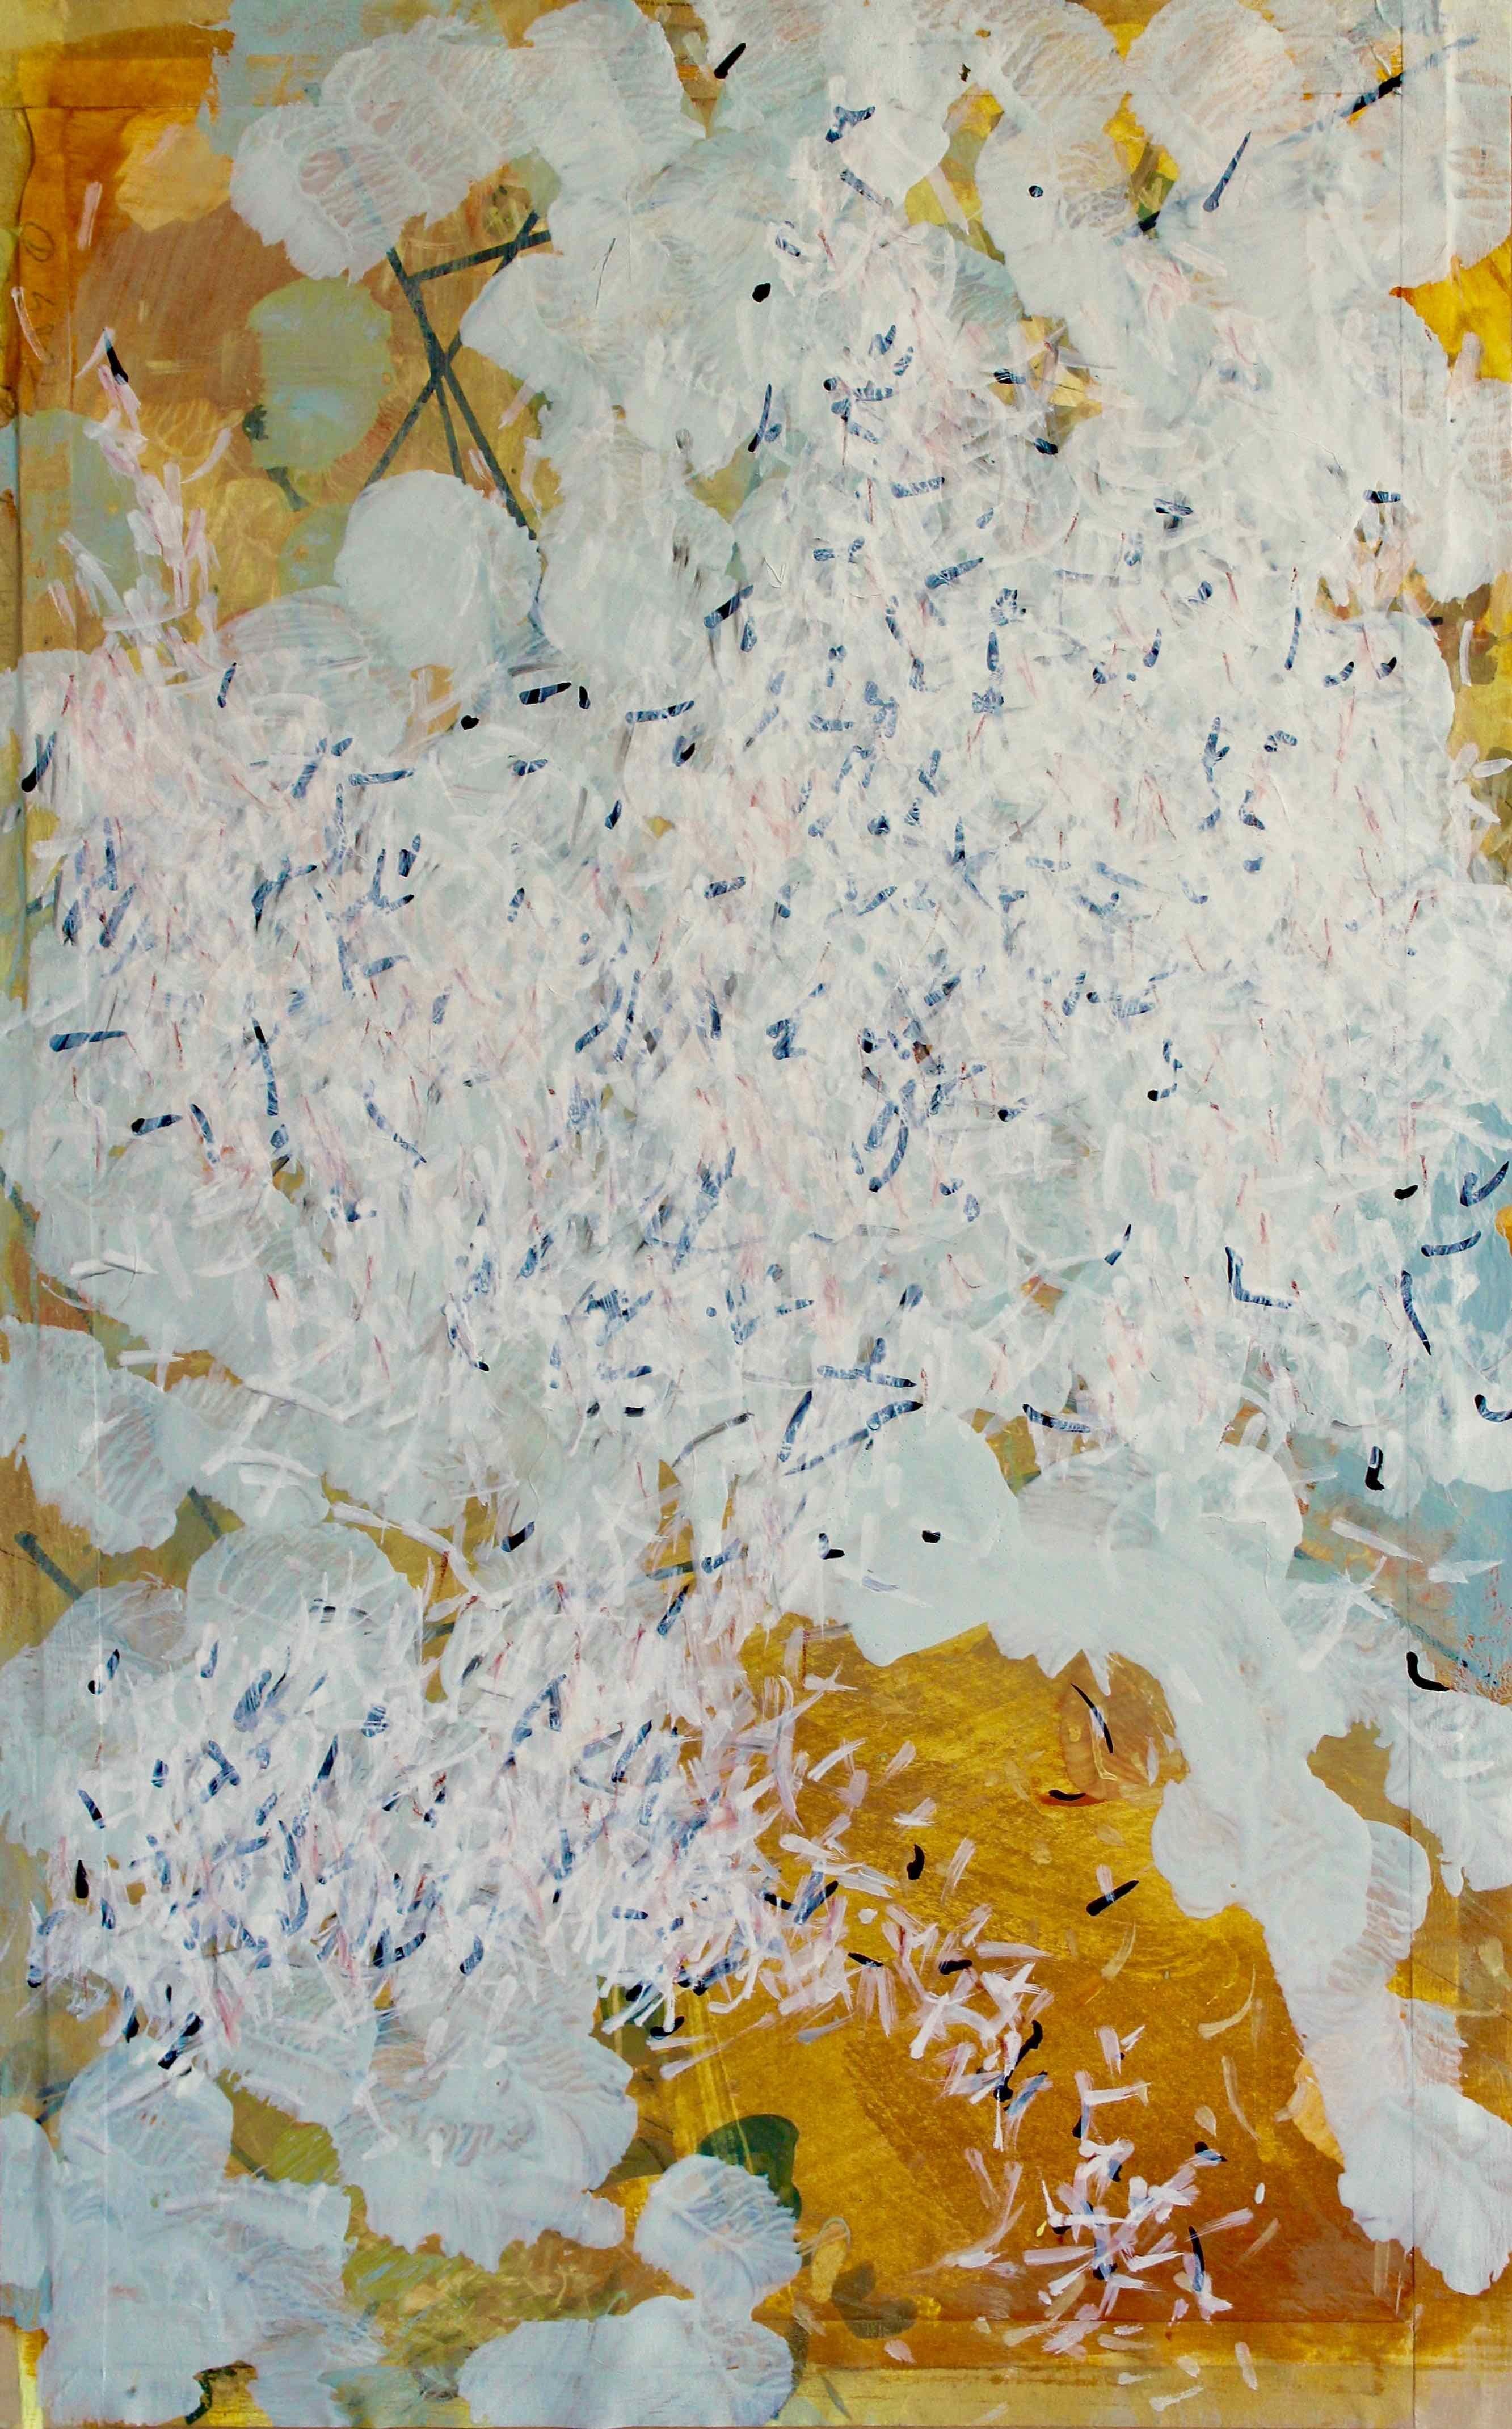 Swarm 1: Painting of a Swarm of White Butterflies by Royal West Academician